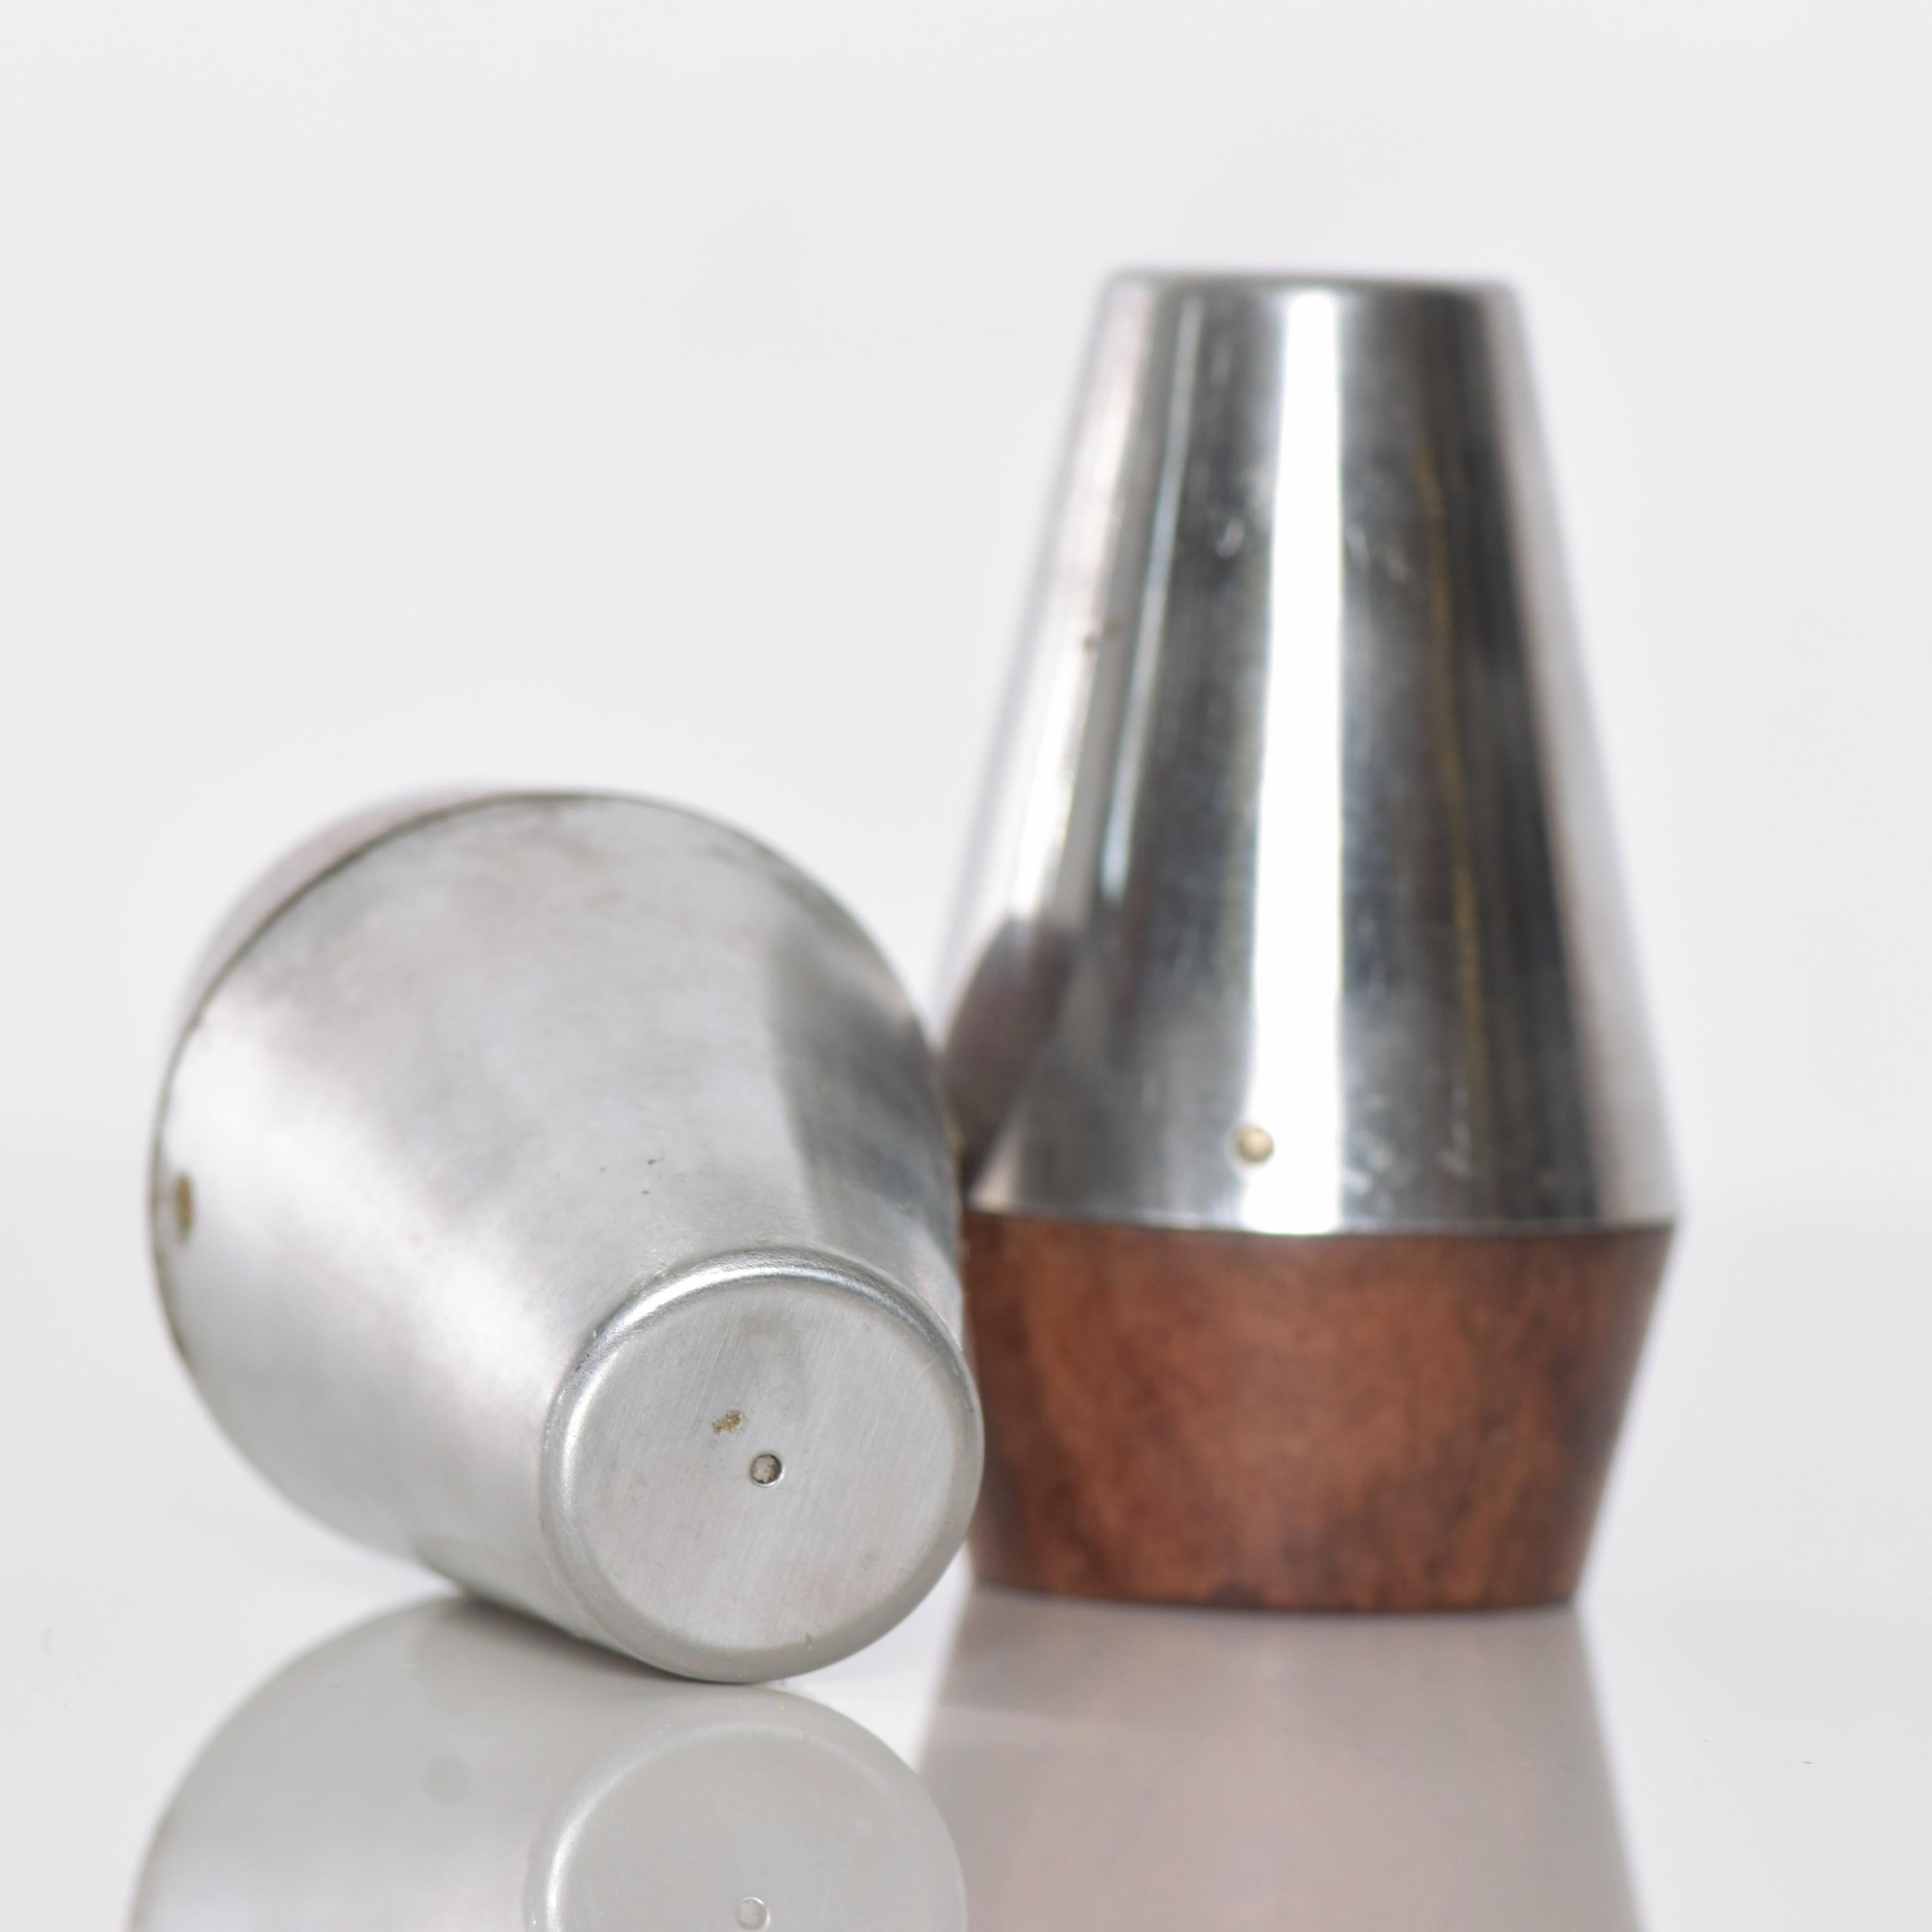 Mid-Century Modern  Stainless Steel & Rosewood Salt Pepper Shaker Set 1960s Style of AB Lundtofte